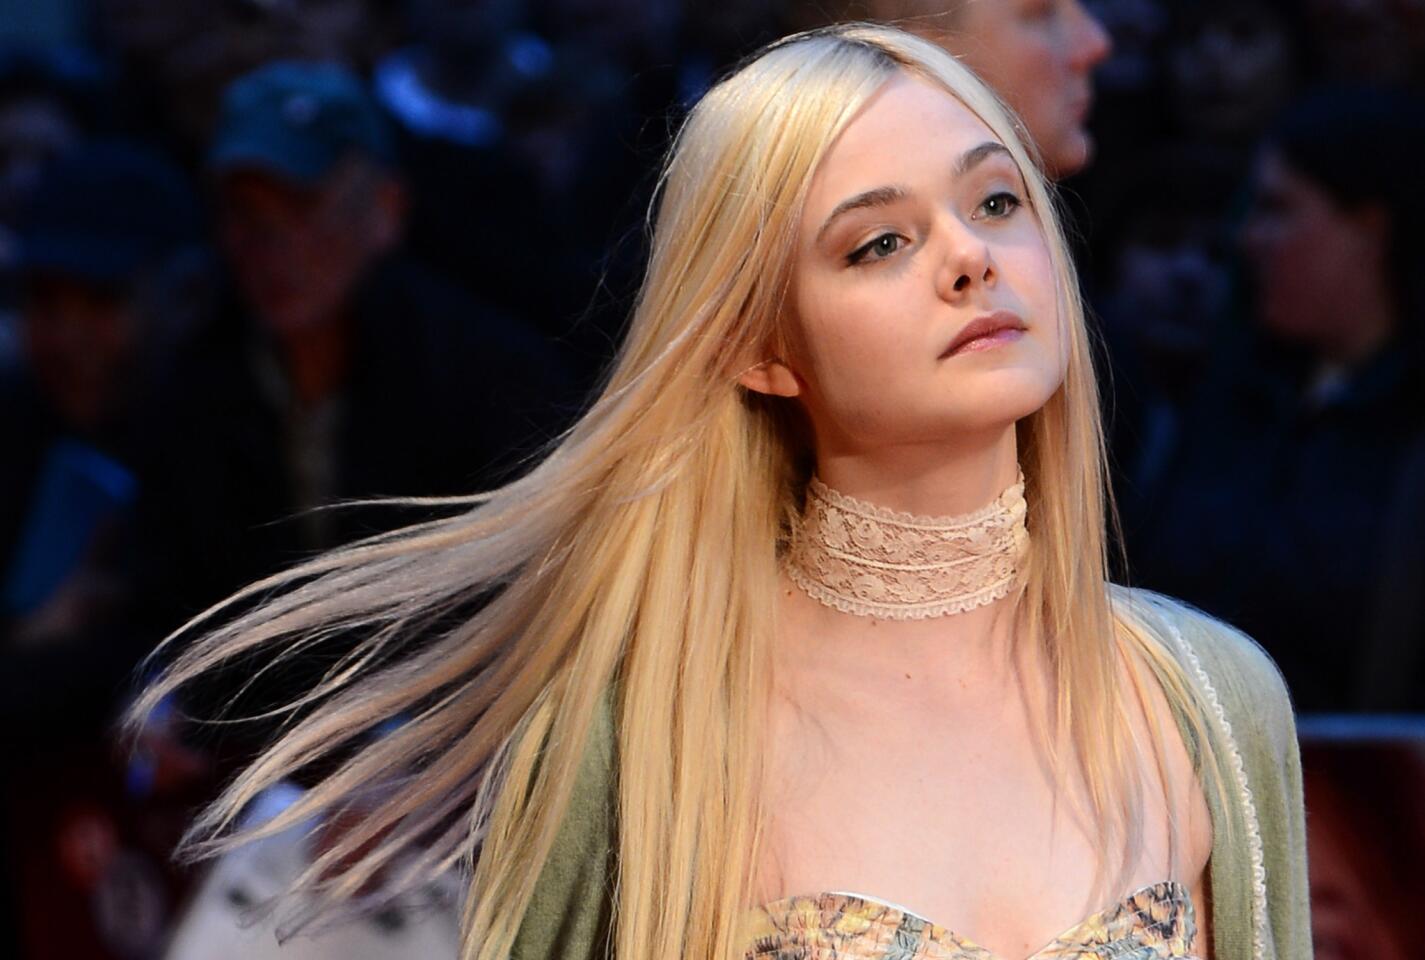 Elle Fanning attends the premiere of 'Ginger and Rosa' during the 56th BFI London Film Festival.